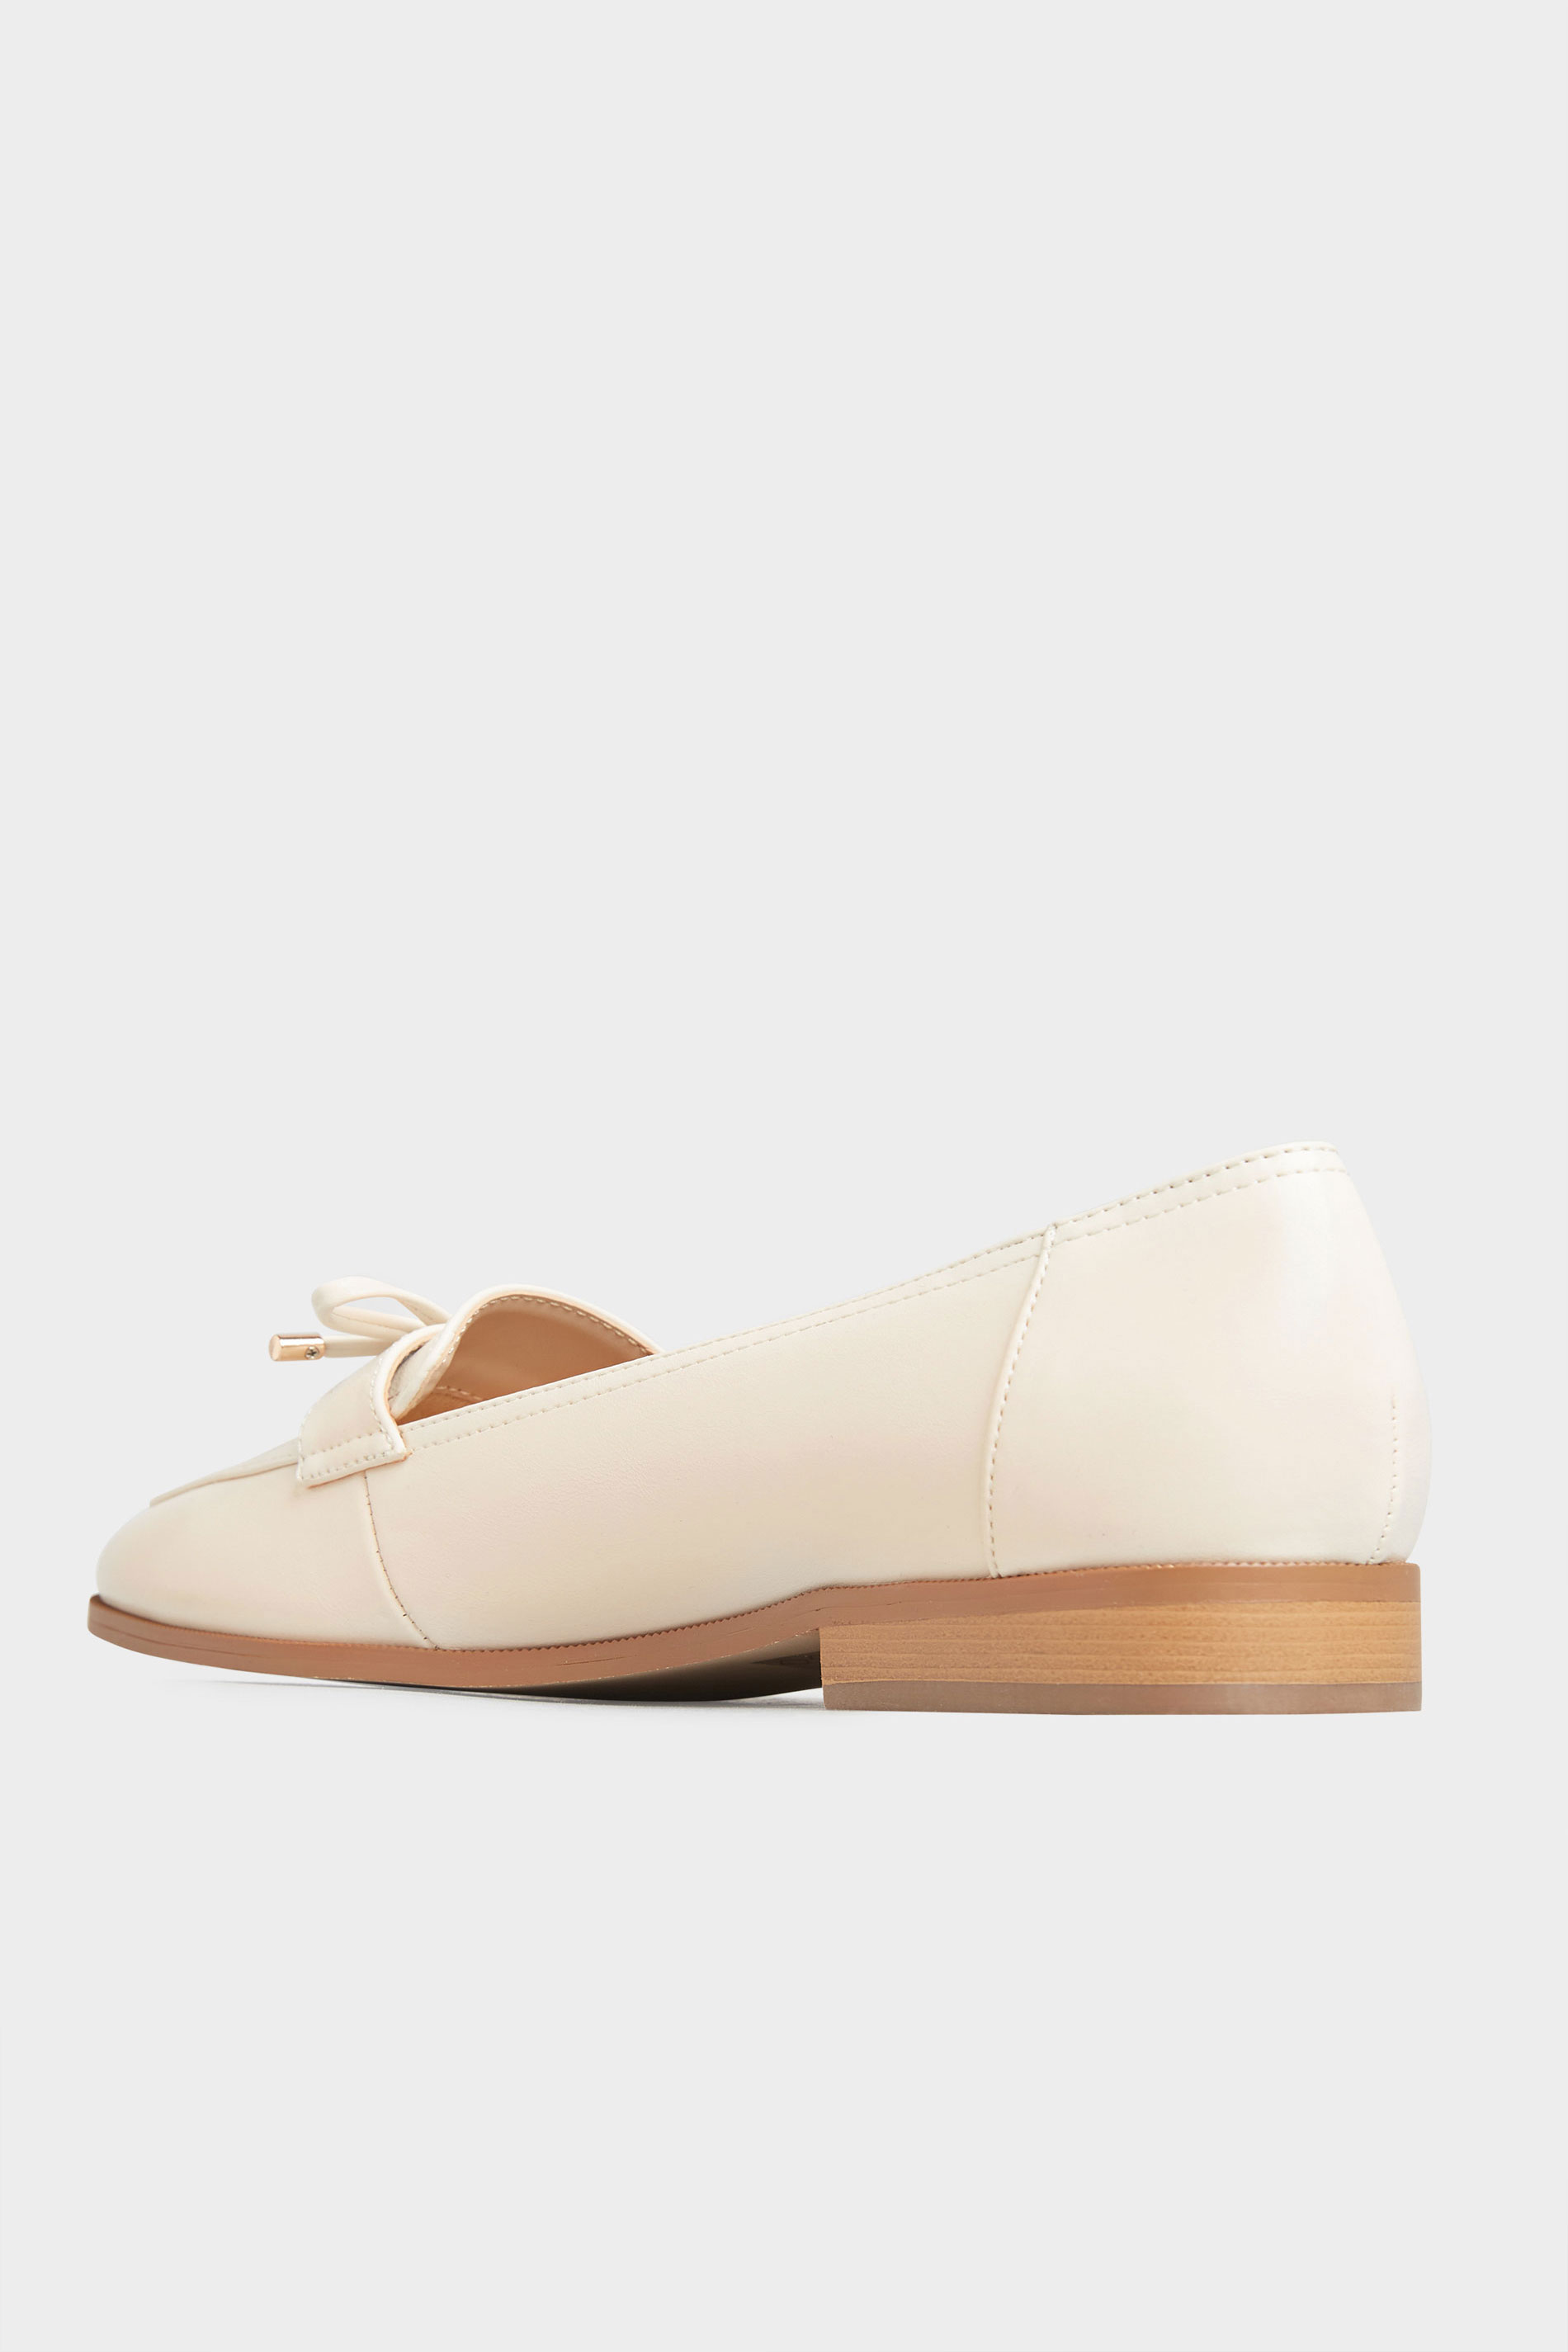 LTS White Bow Trim Loafers In Standard Fit | Long Tall Sally